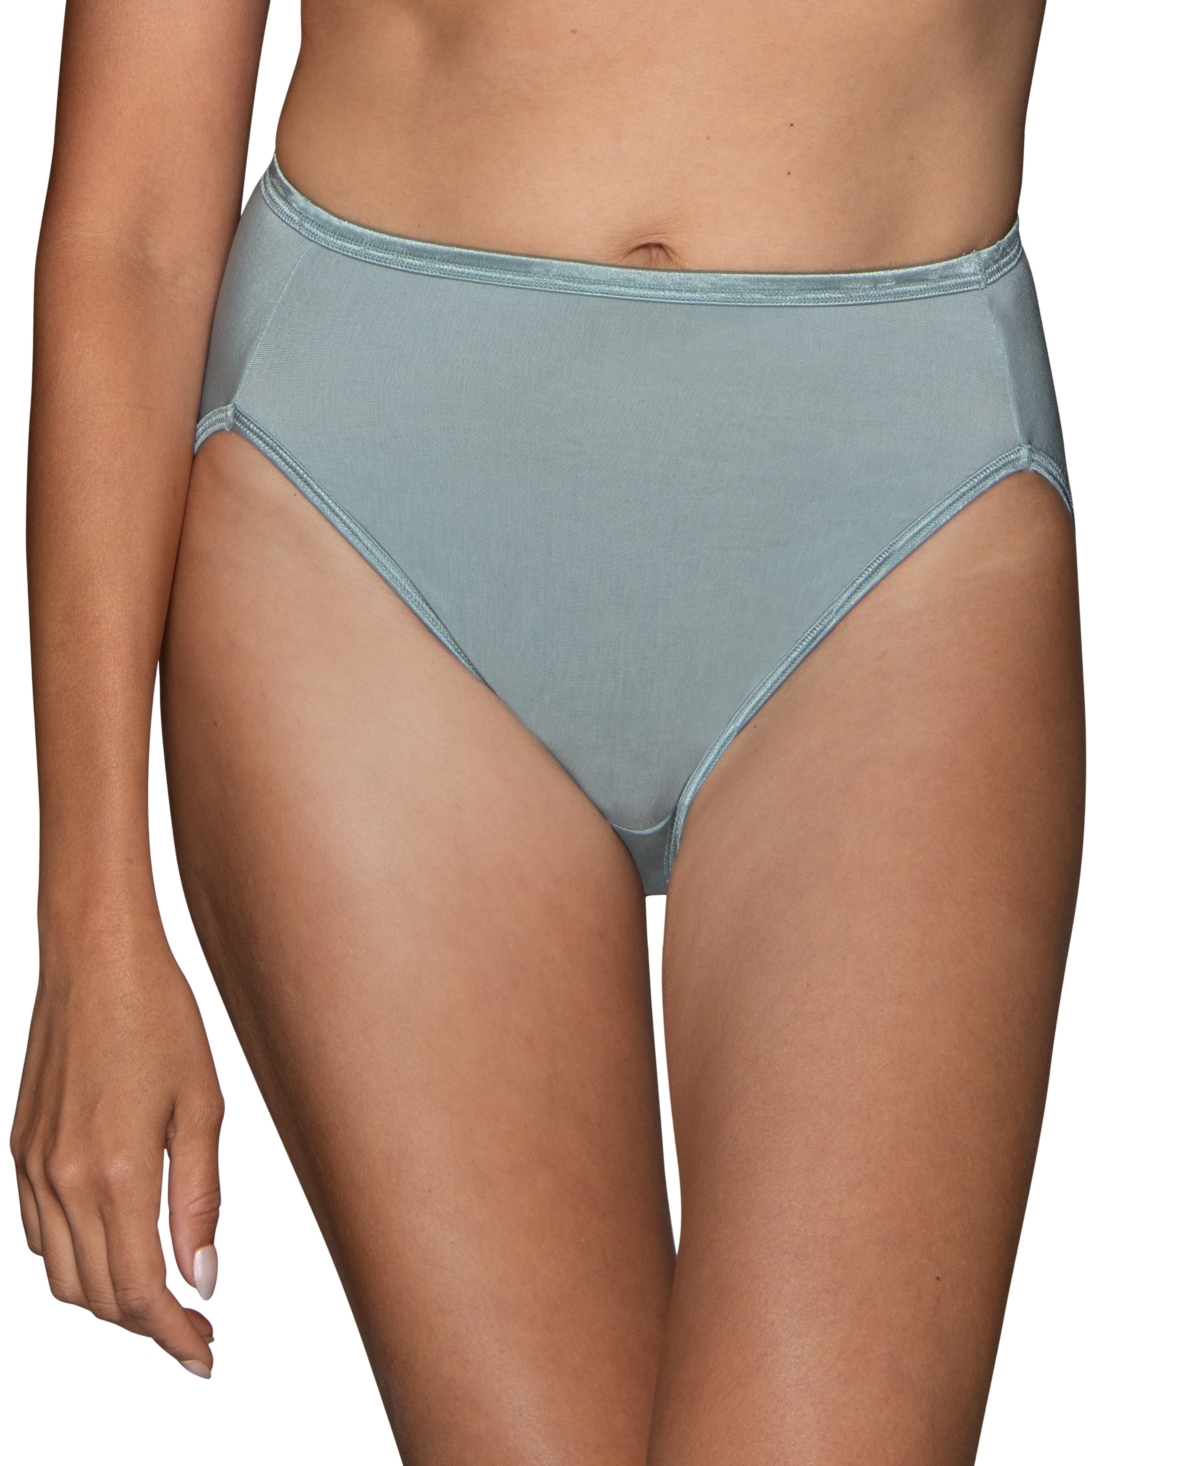 Illumination Hi-Cut Brief Underwear 13108, also available in extended sizes - Mint Chip